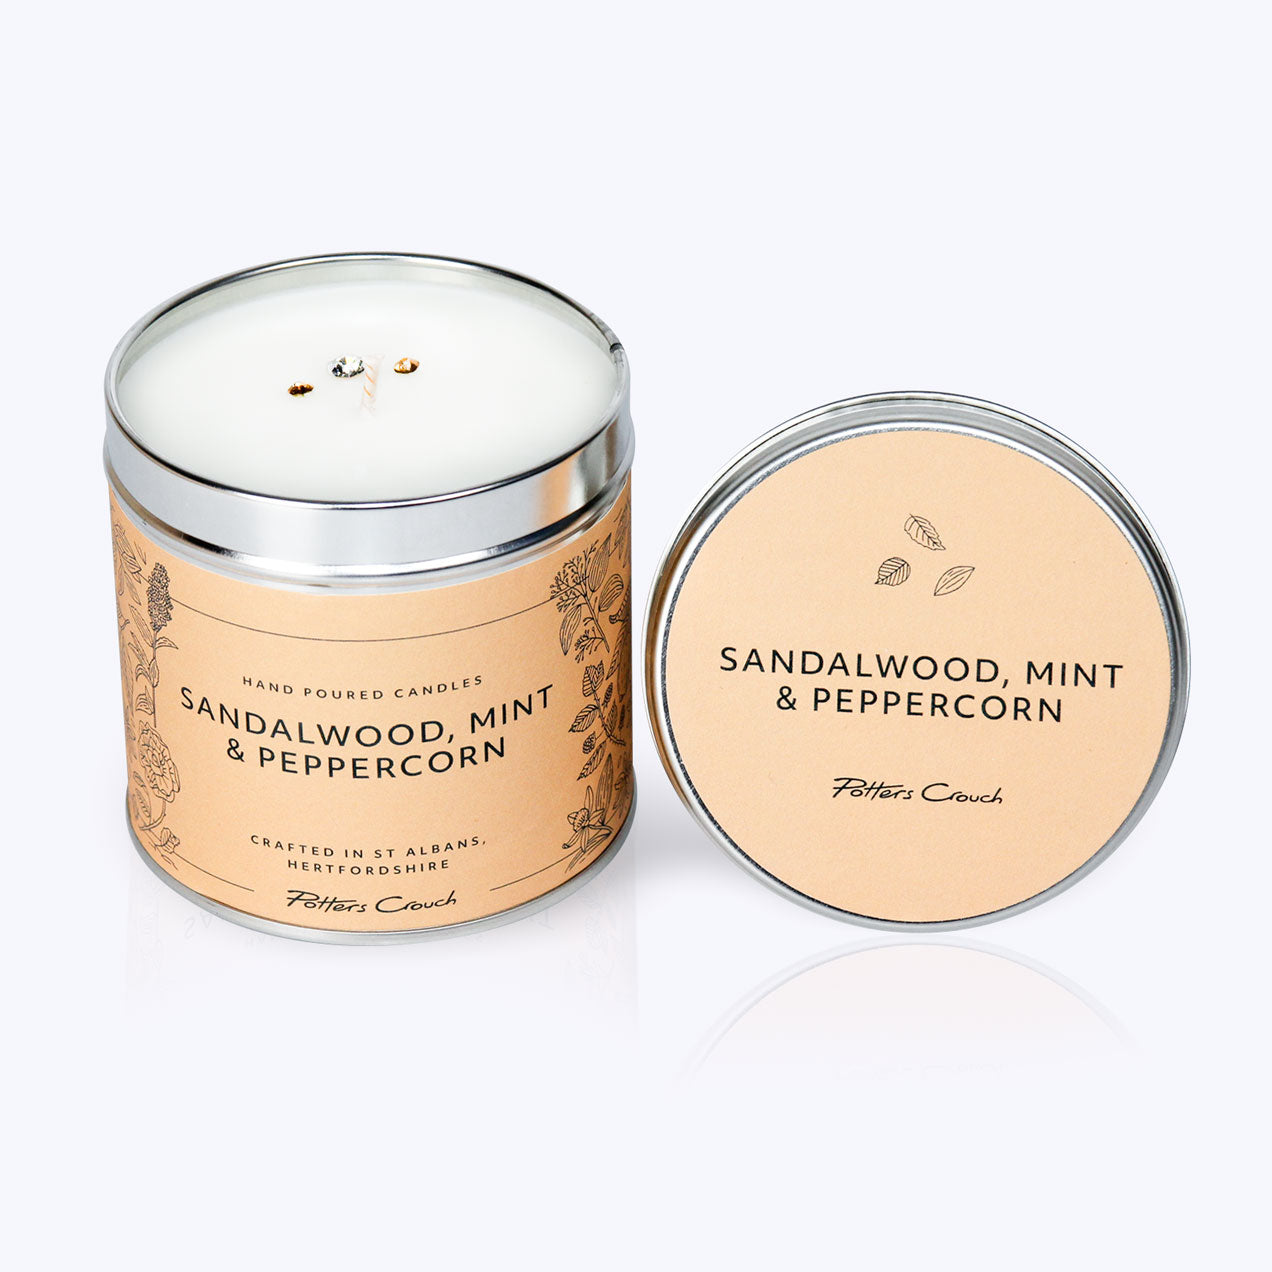 SANDALWOOD, MINT & PEPPERCORN SCENTED CANDLE